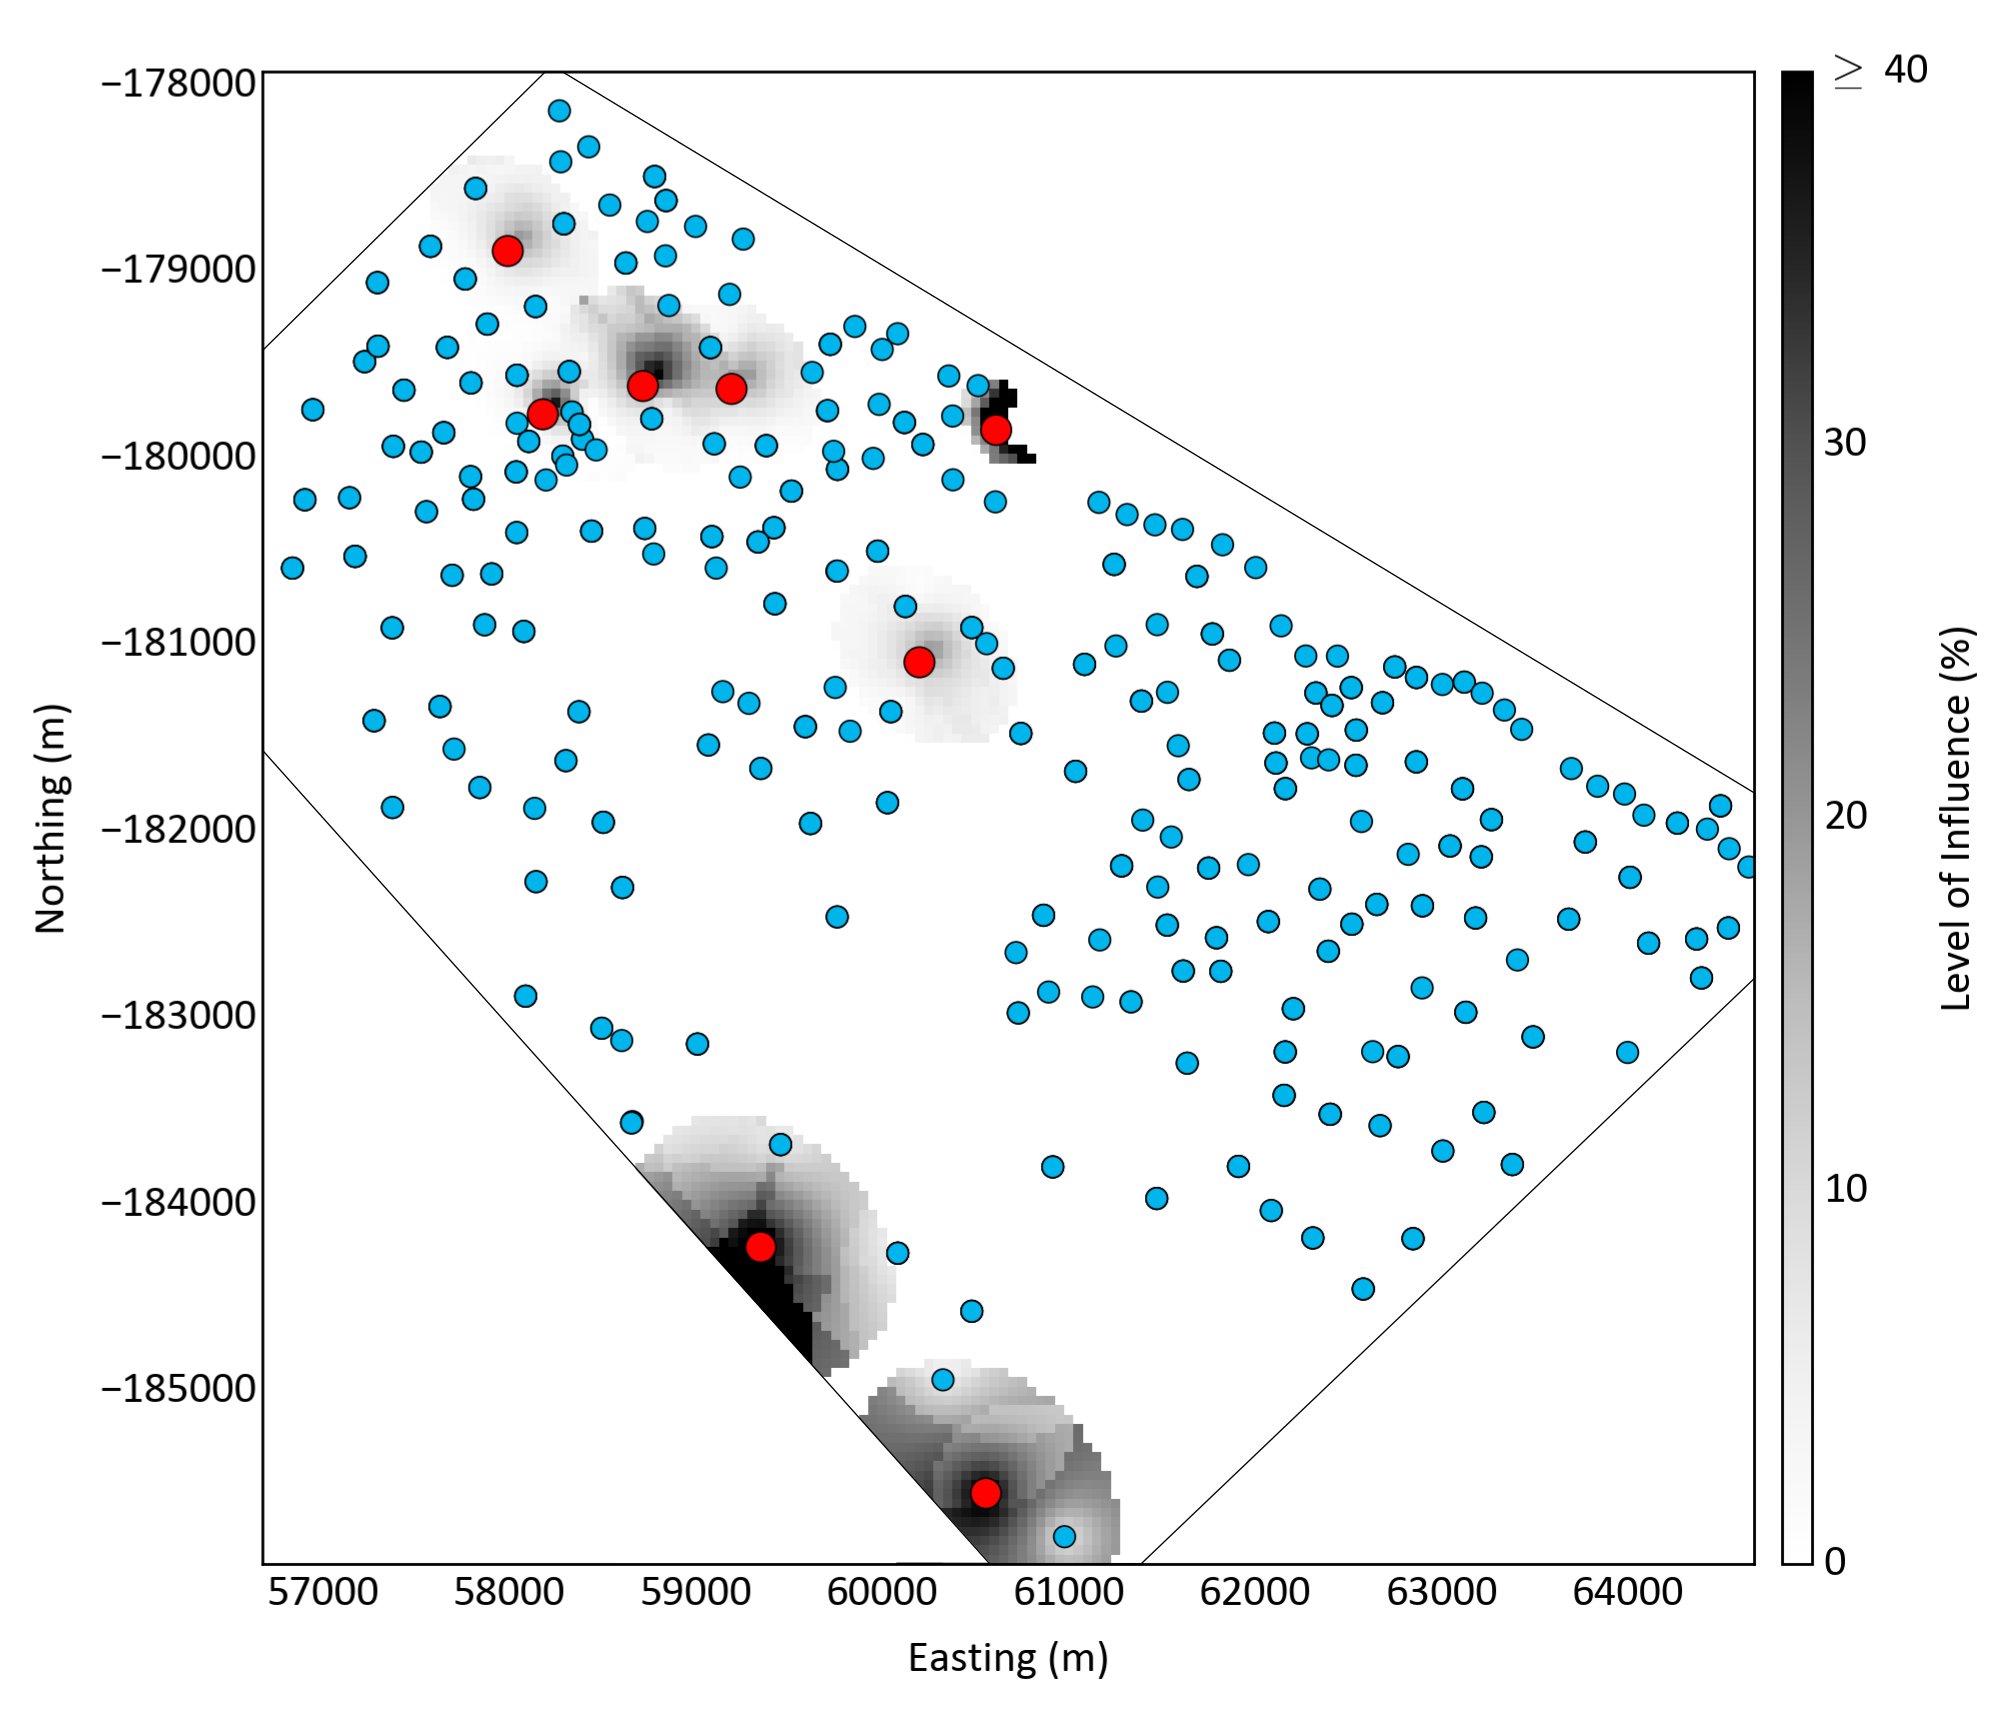 Plan view of the auxiliary data variable and volume of influence of outliers. Outliers are shown as red dots and the outlier influence in gray scale. The black thin line indicates the domain boundary used.